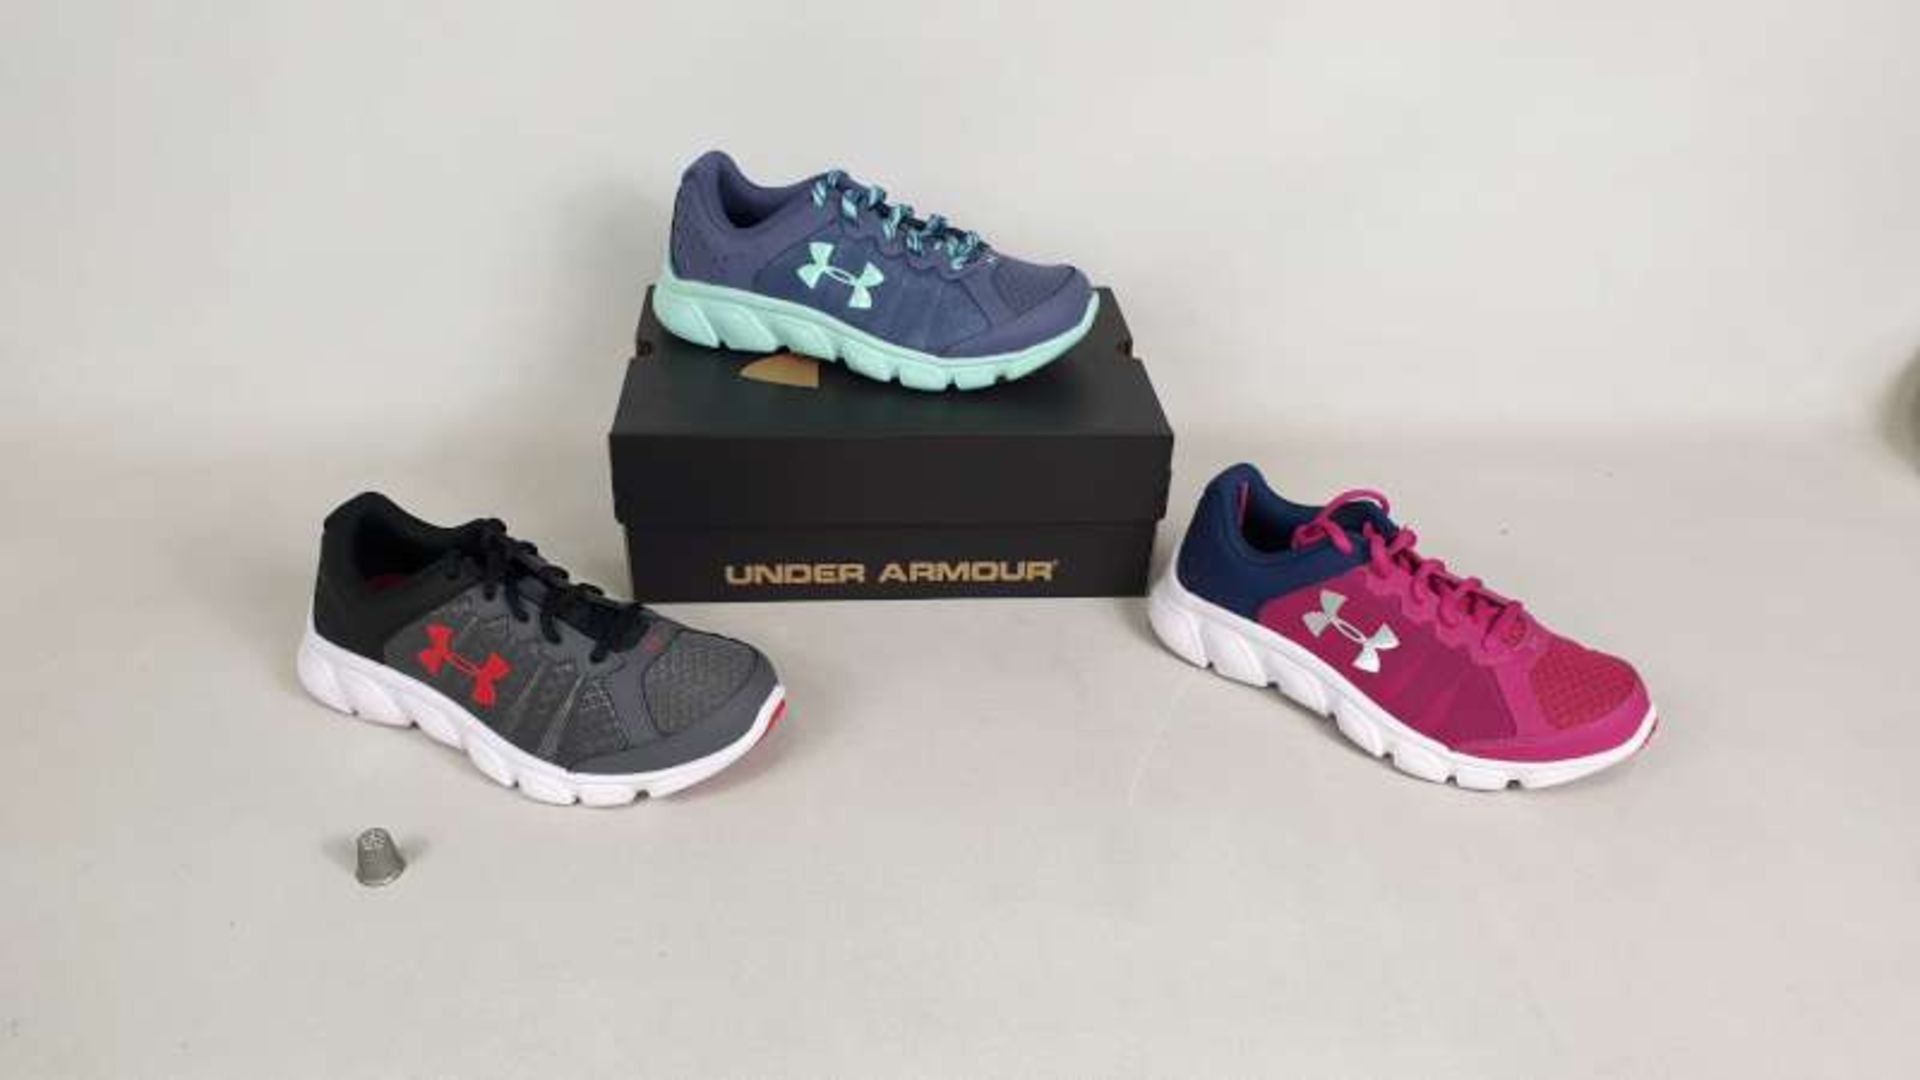 10 X BOXED NEW UNDER ARMOUR ASSERT 6 CHILDRENS TRAINERS PINK AND GREY SIZE 12